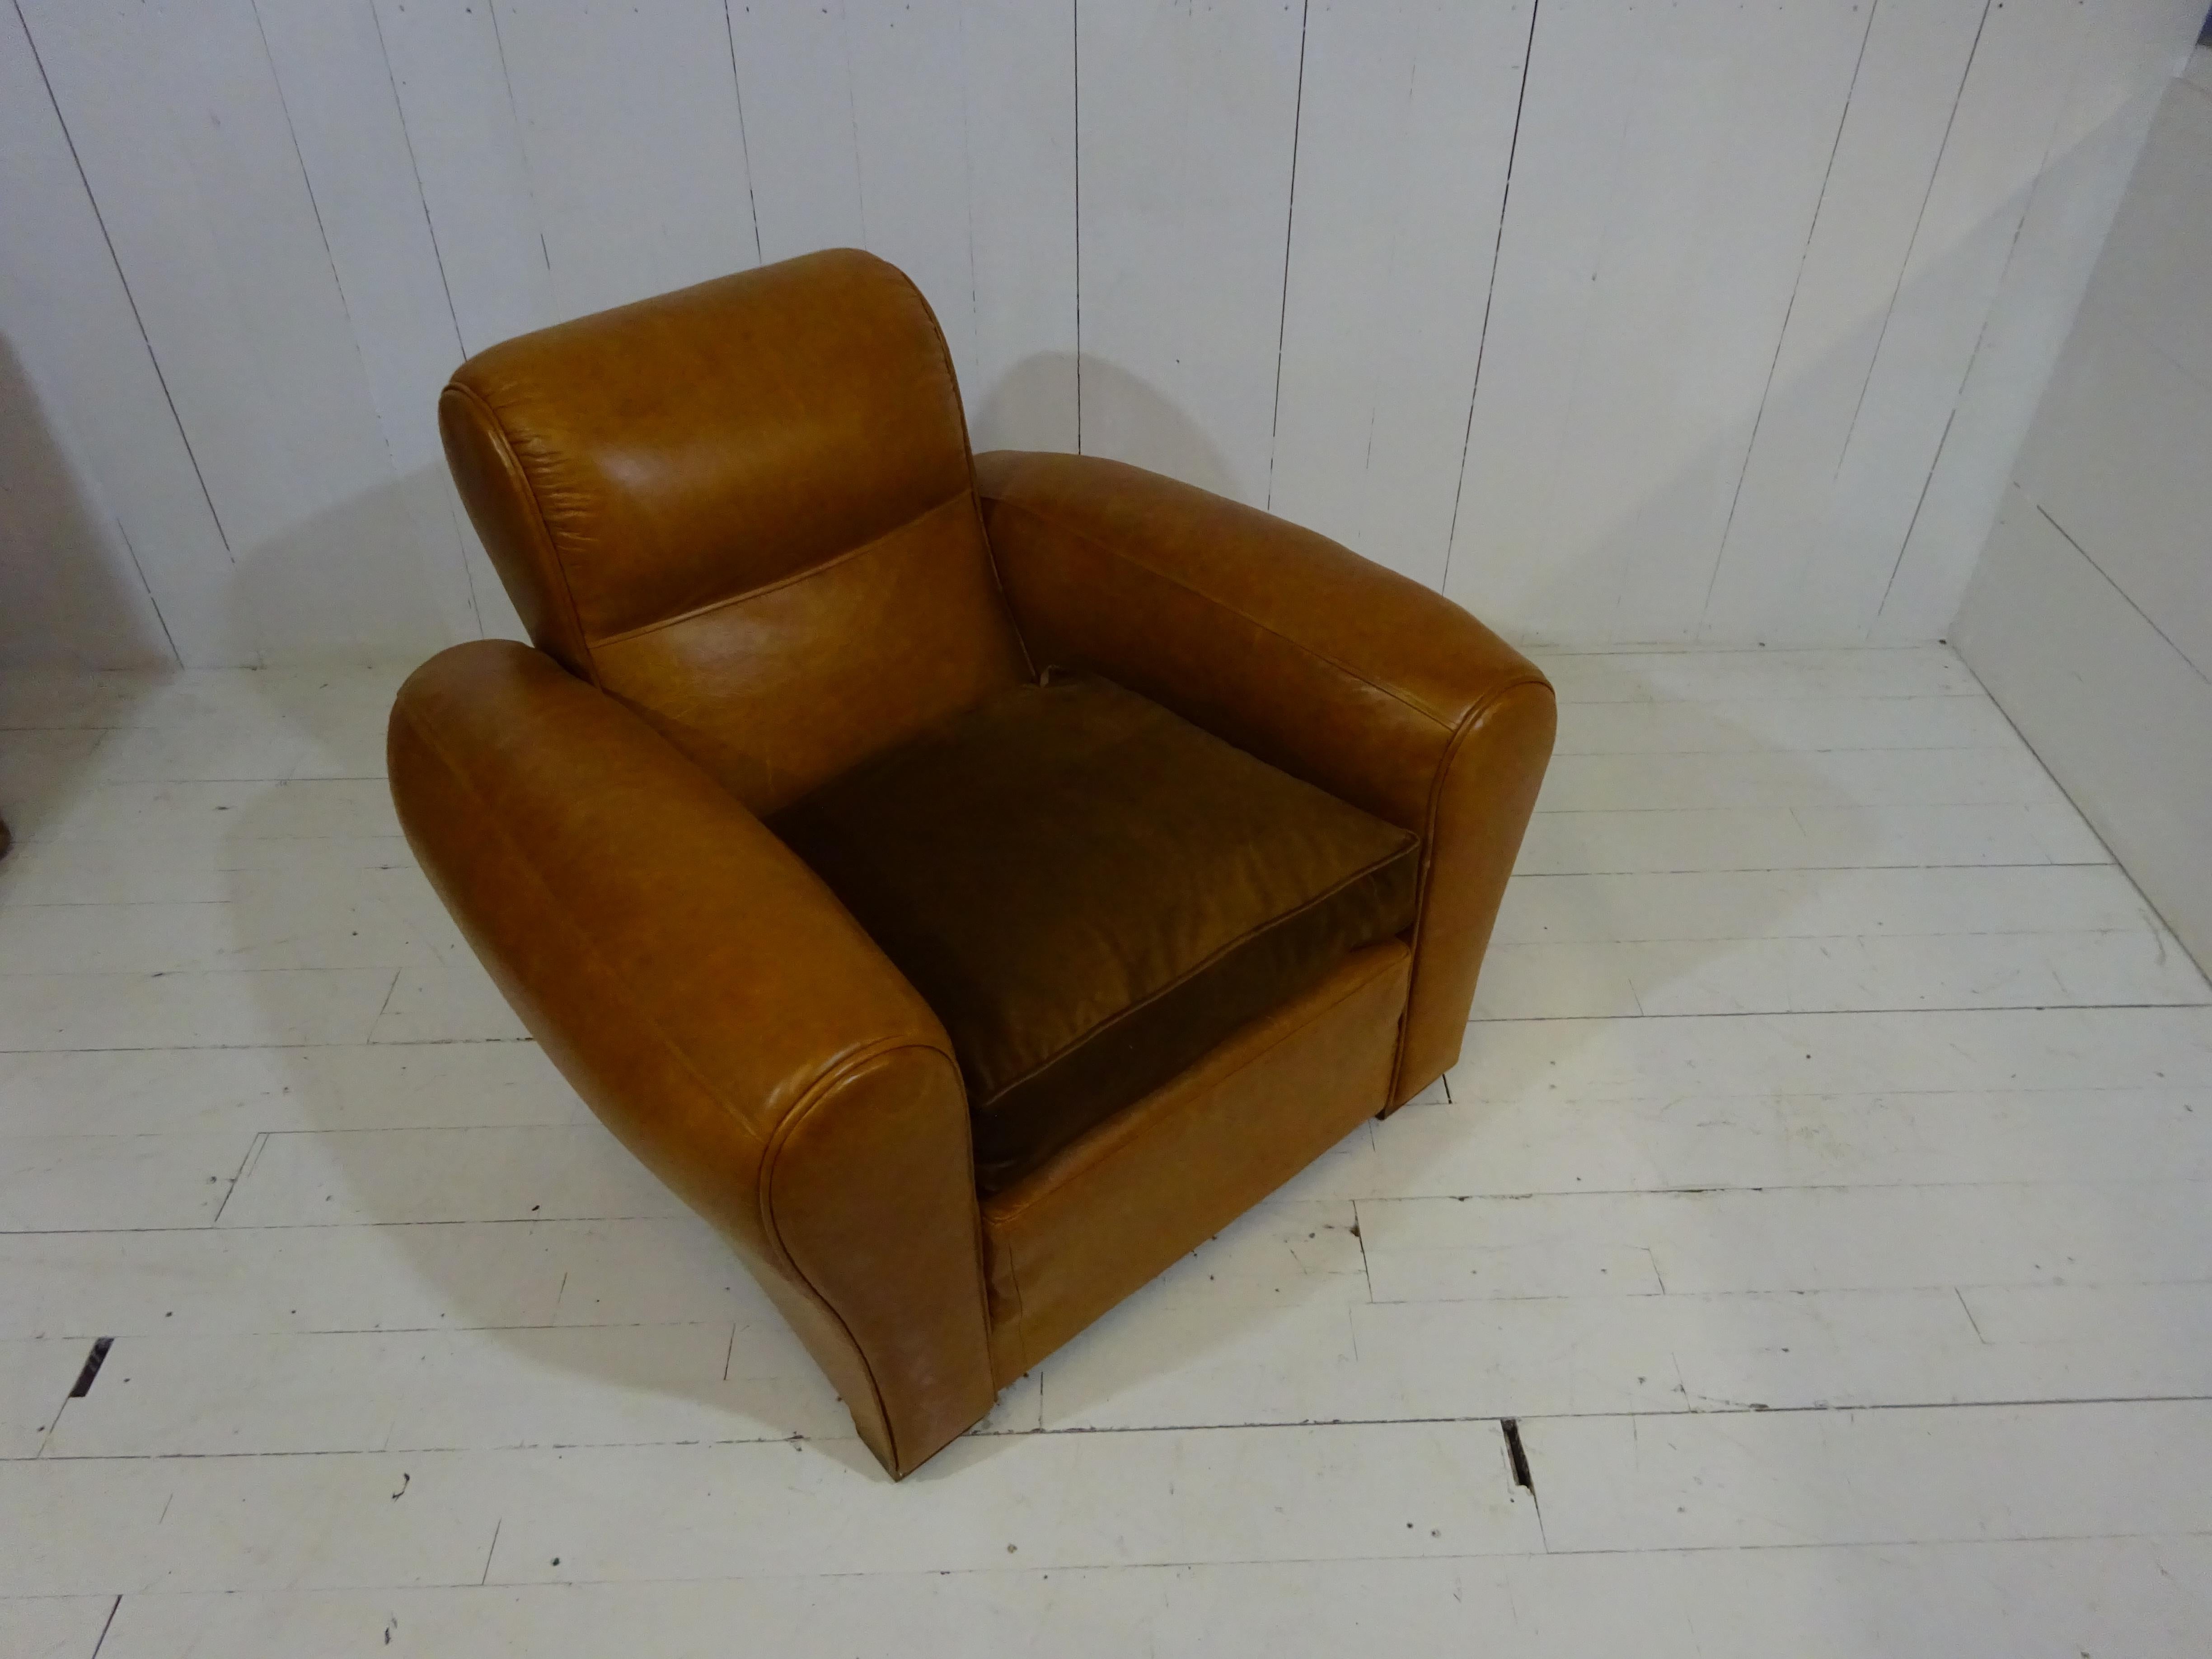 Early 20th Century 1920's Art Deco Club Chair in Distressed Caramel Aniline Leather